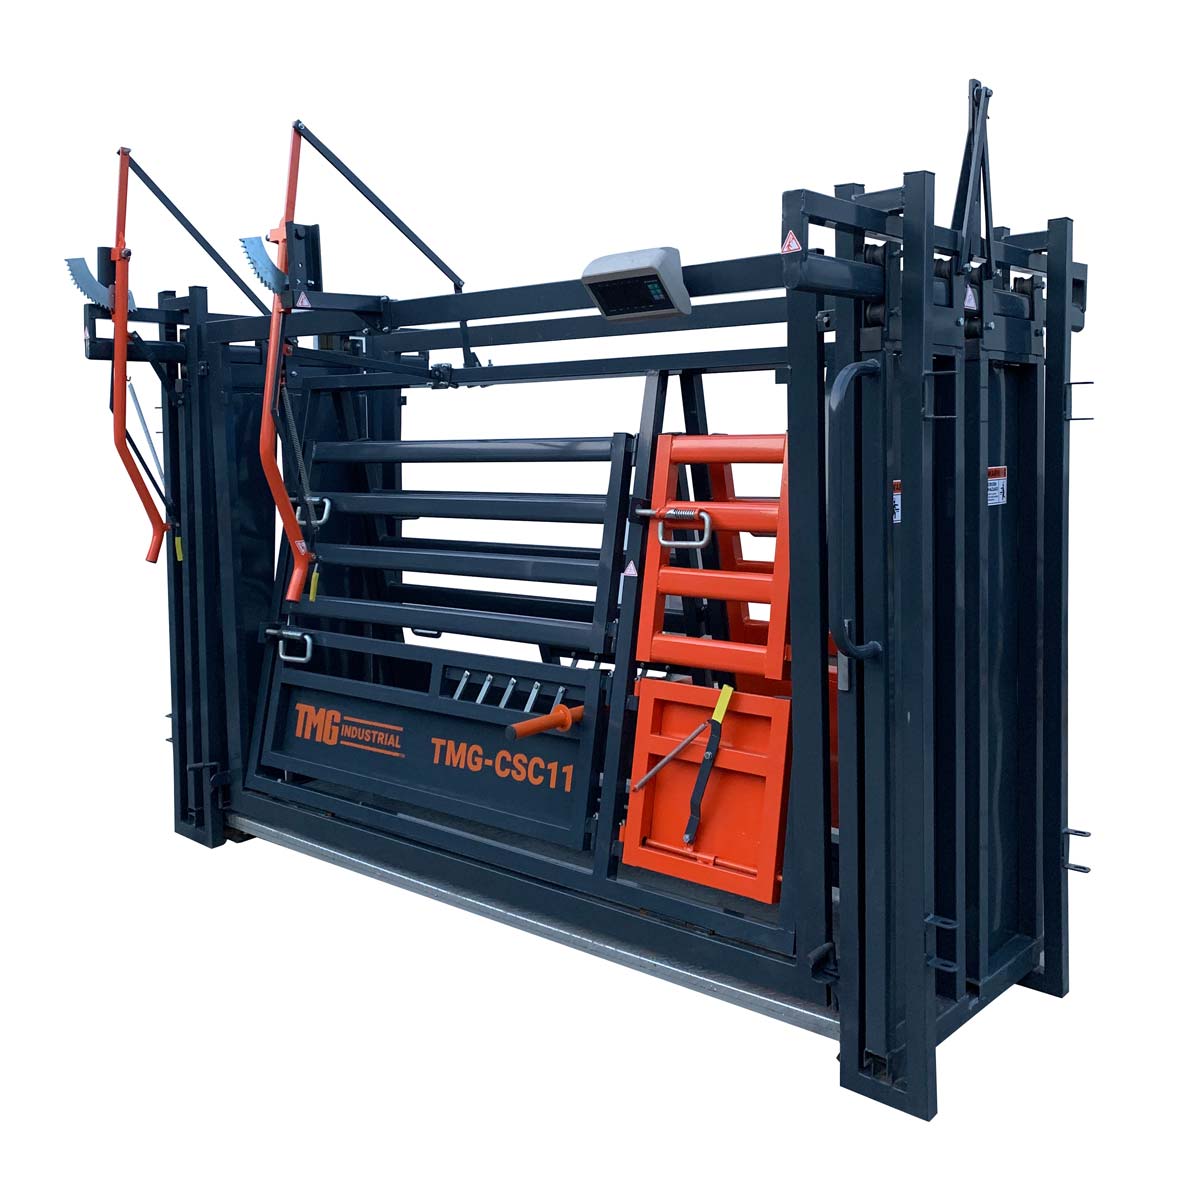 Cattle Working Chute Scale Kits - Central City Scale